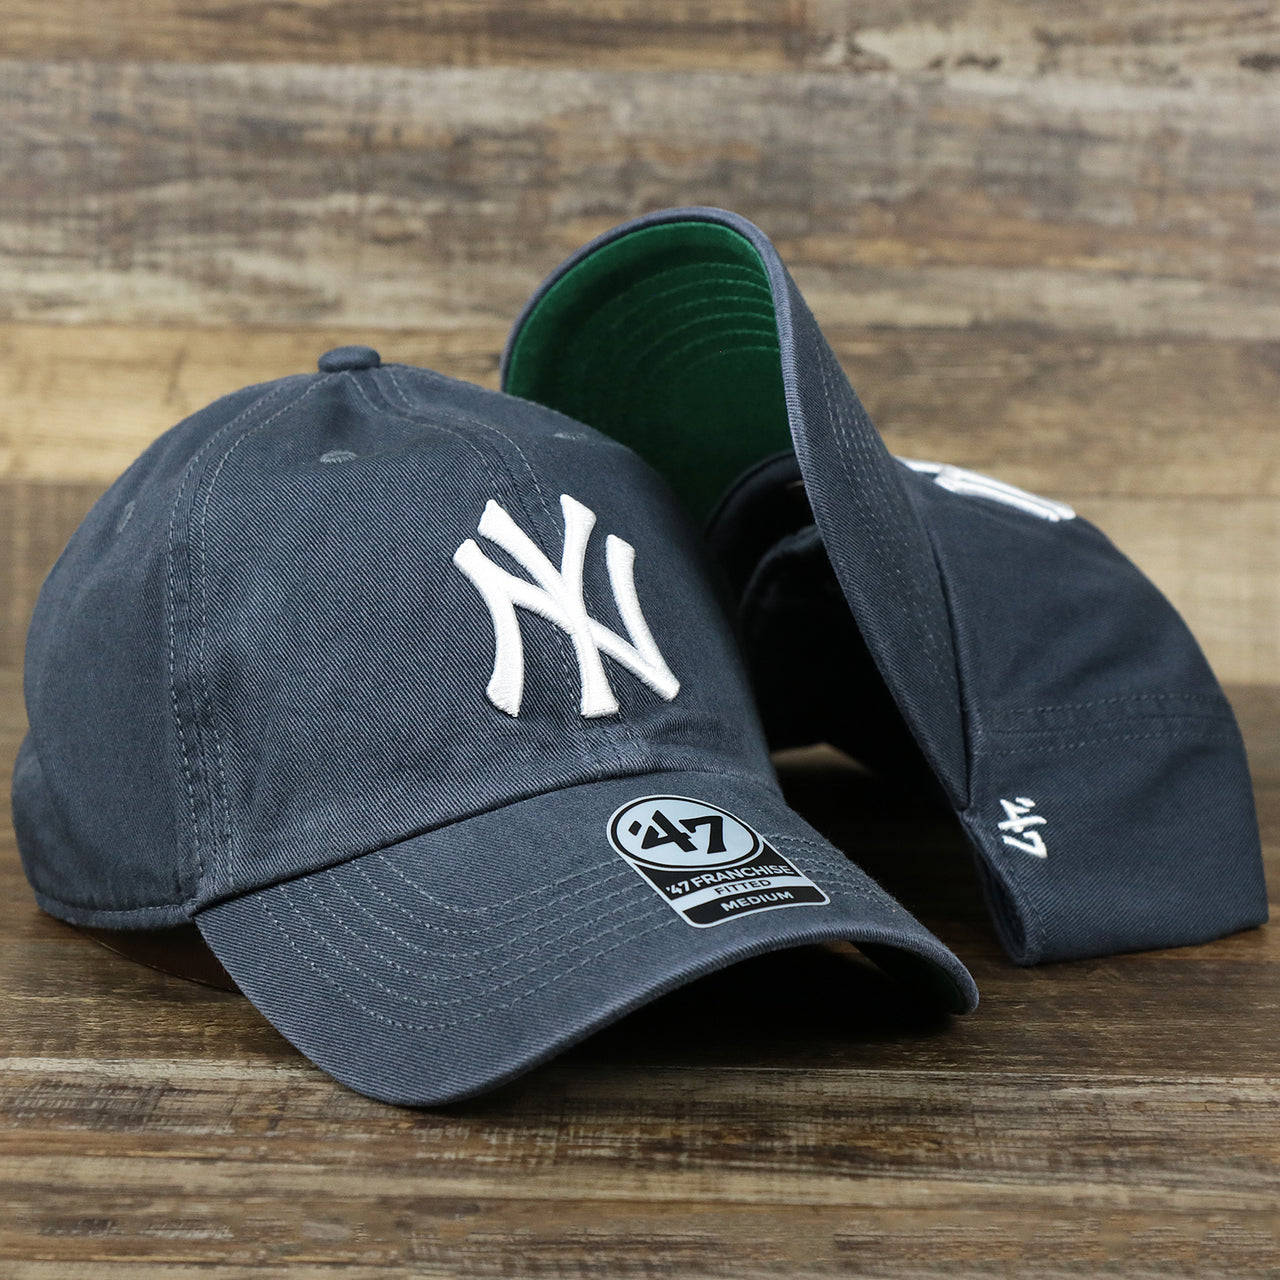 The Cooperstown New York Yankees Green Bottom Yankees Wordmark Fitted Cap | Vintage Navy Fitted Cap